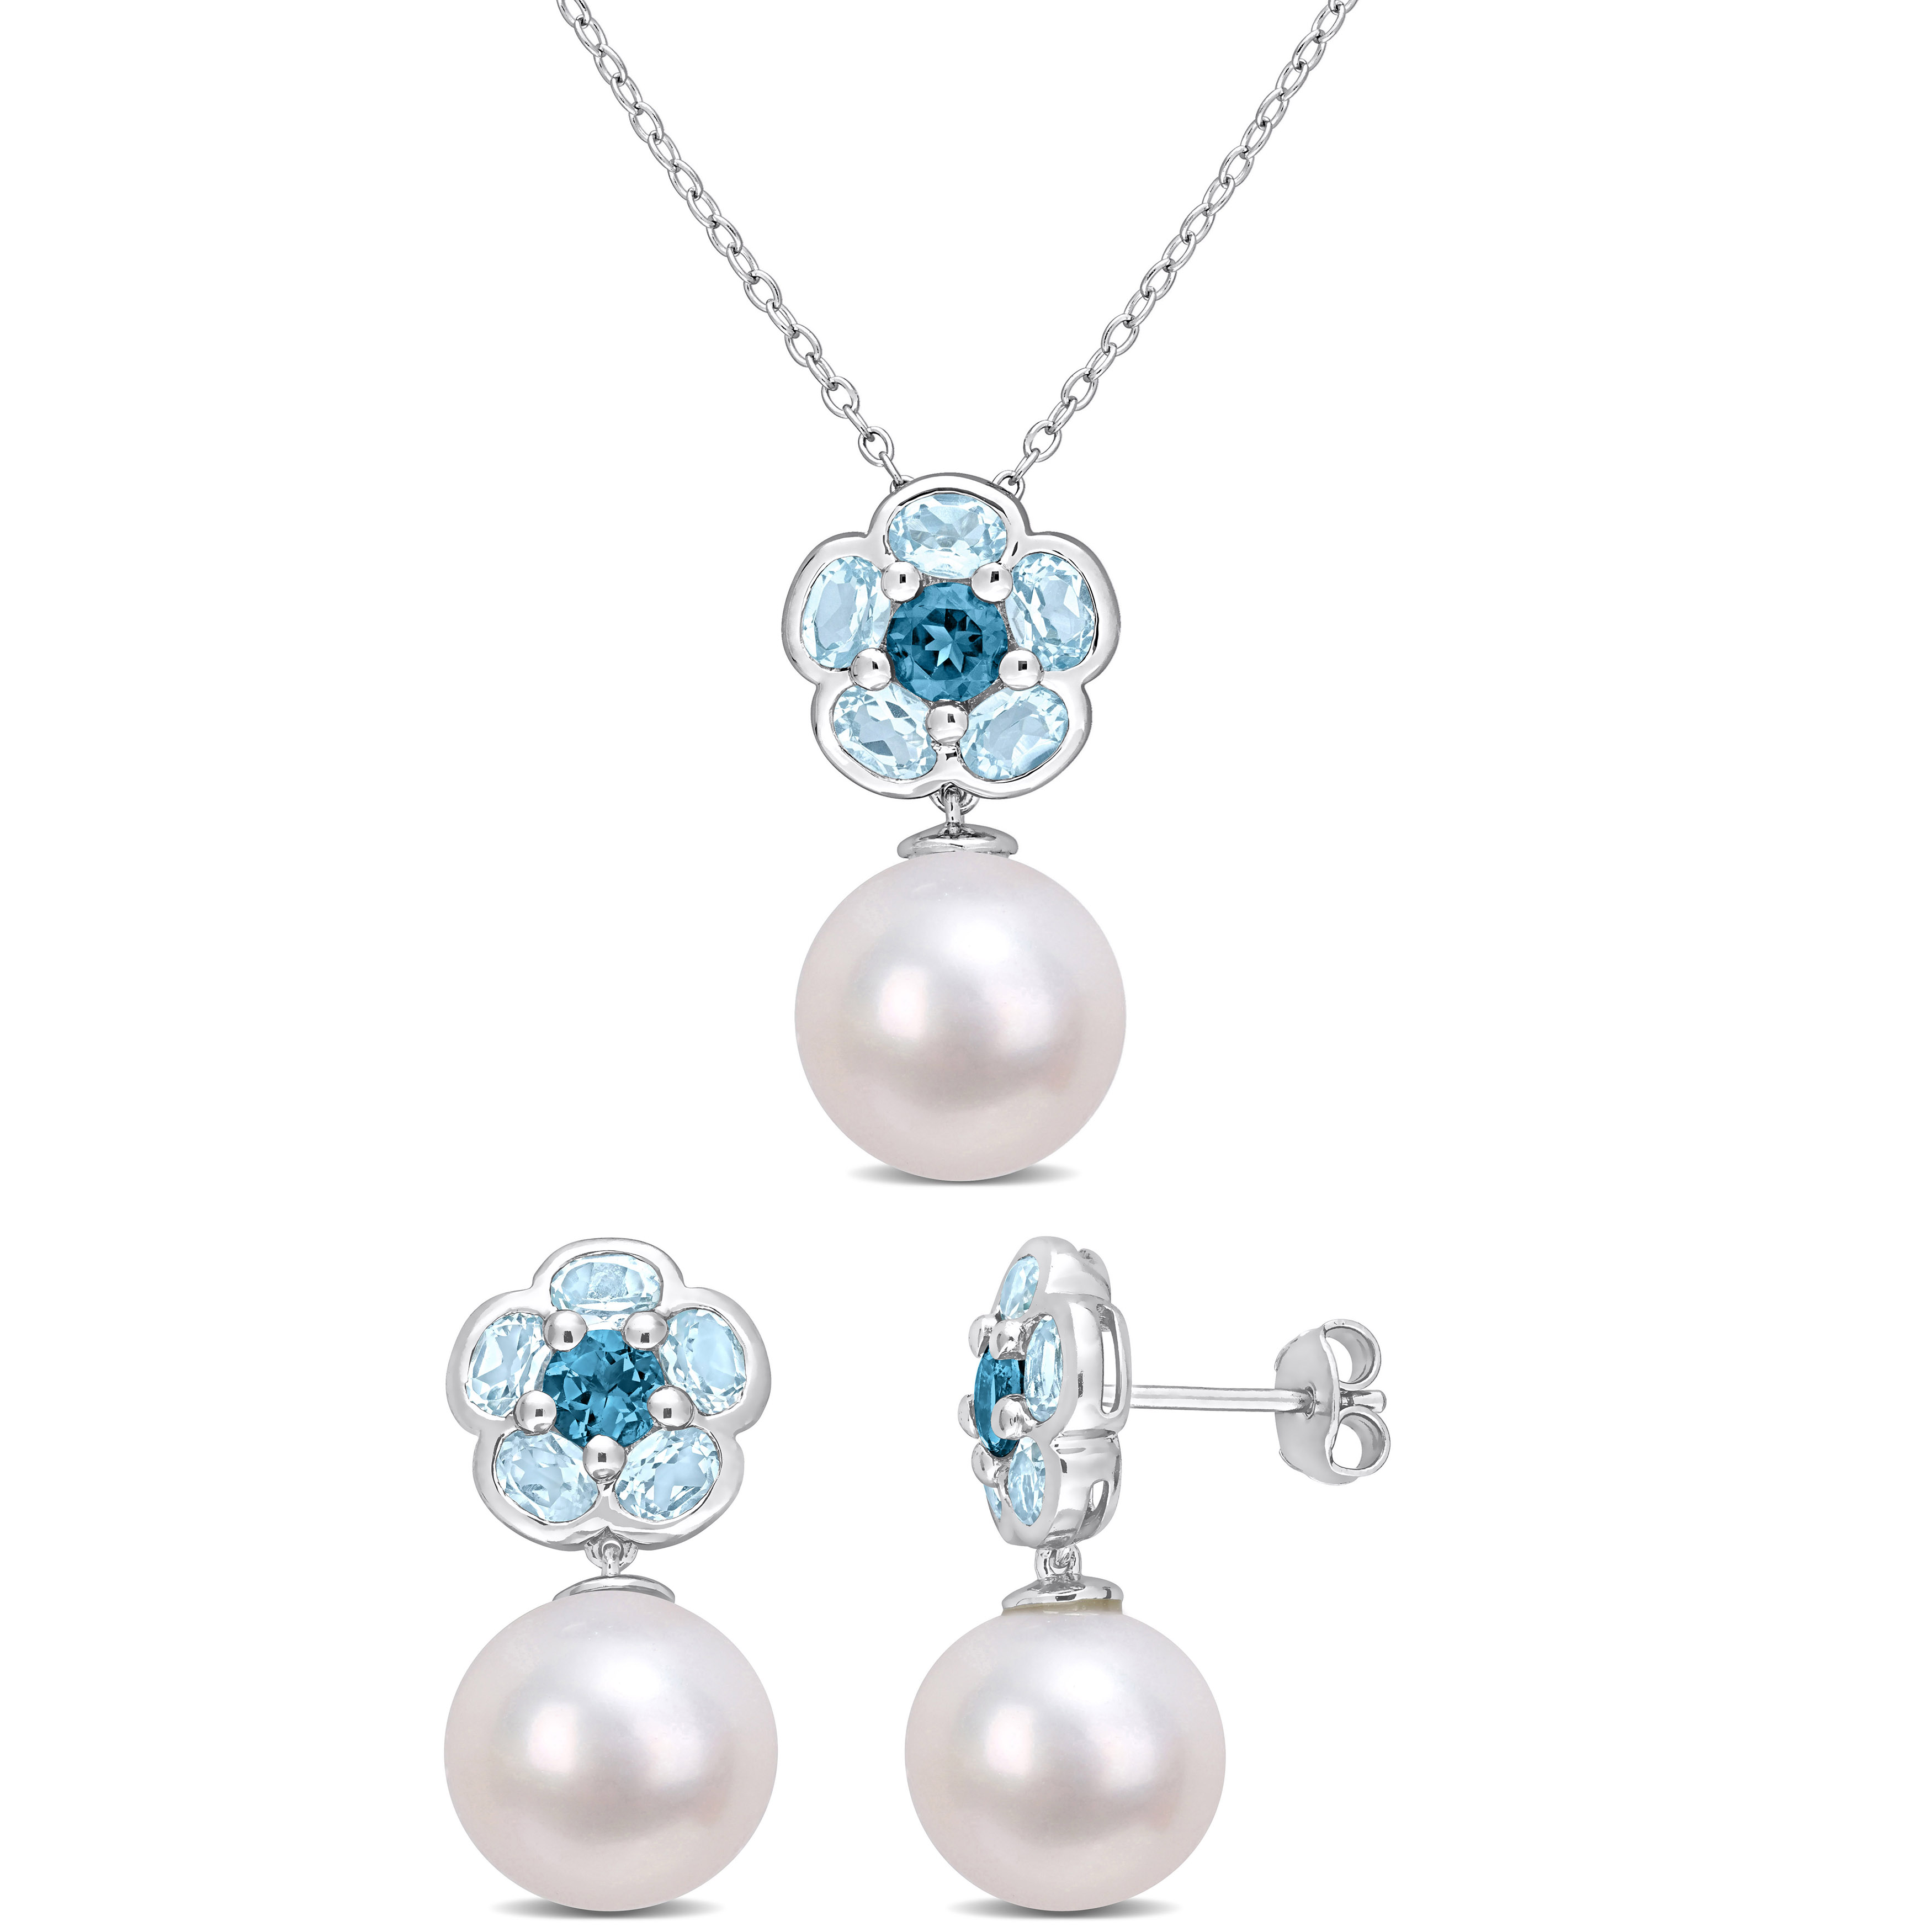 4 5/8 CT TGW London-Blue Topaz Oval-Cut Sky-Blue Topaz and White Round Cultured Freshwater Pearl 2-Piece Drop Necklace and Earrings Set in Sterling Silver